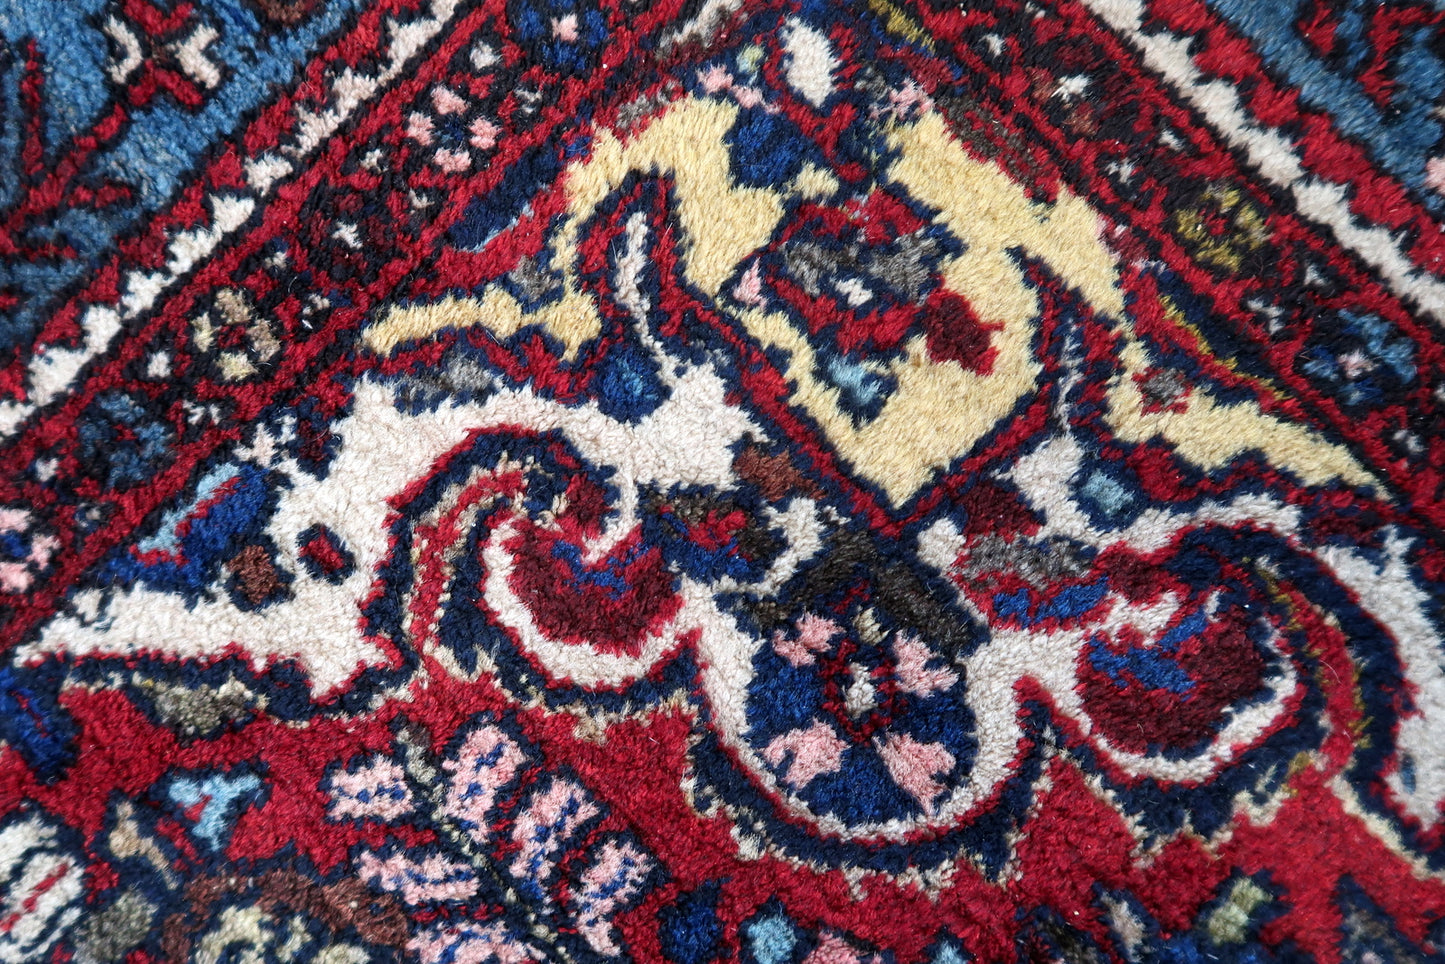 Close-up of floral motifs on Handmade Vintage Persian Malayer Rug - Detailed view highlighting the intricate floral designs.